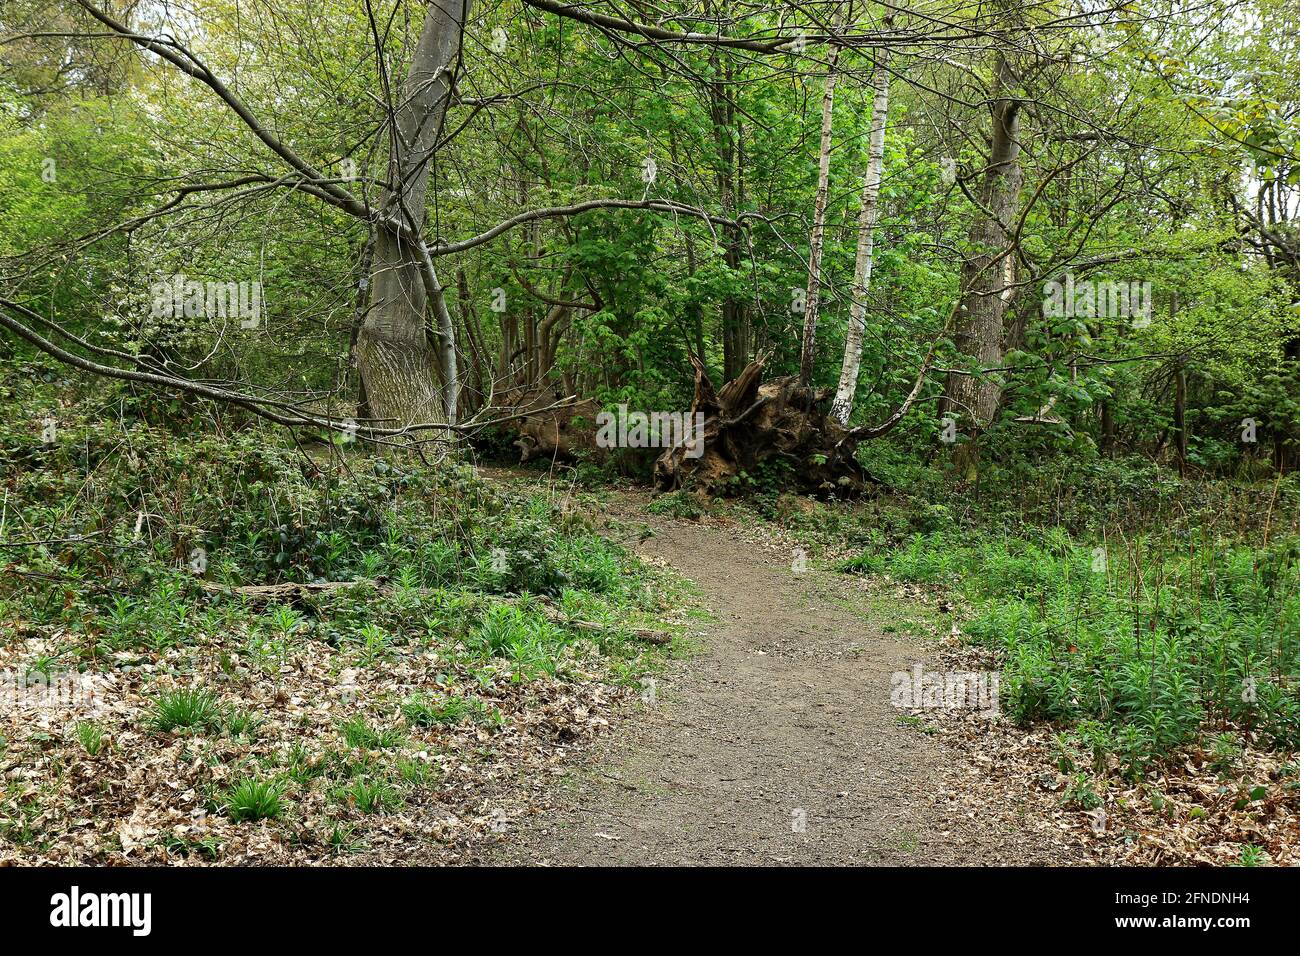 A landscape scene with a Footpath through the Ashenbank woodlands Stock Photo